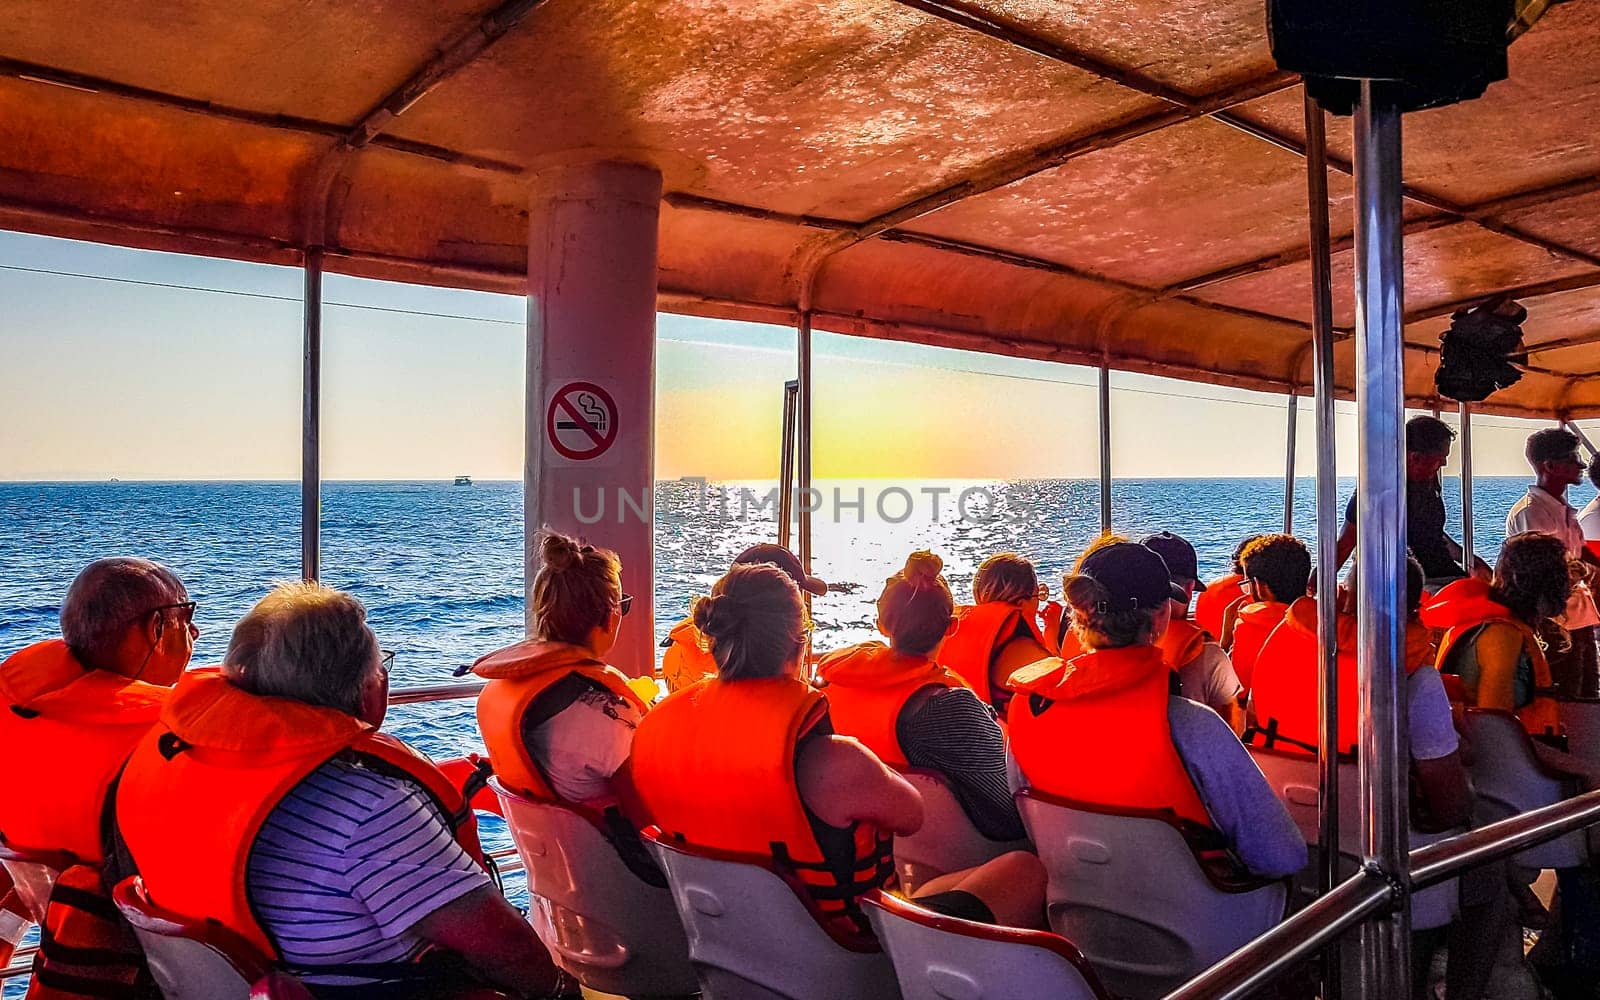 Mirissa Beach Southern Province Sri Lanka 19. March 2018 Boat trip catamaran ship tour blue whale tourists people and sea ocean and water in Mirissa Beach Matara District Southern Province Sri Lanka.